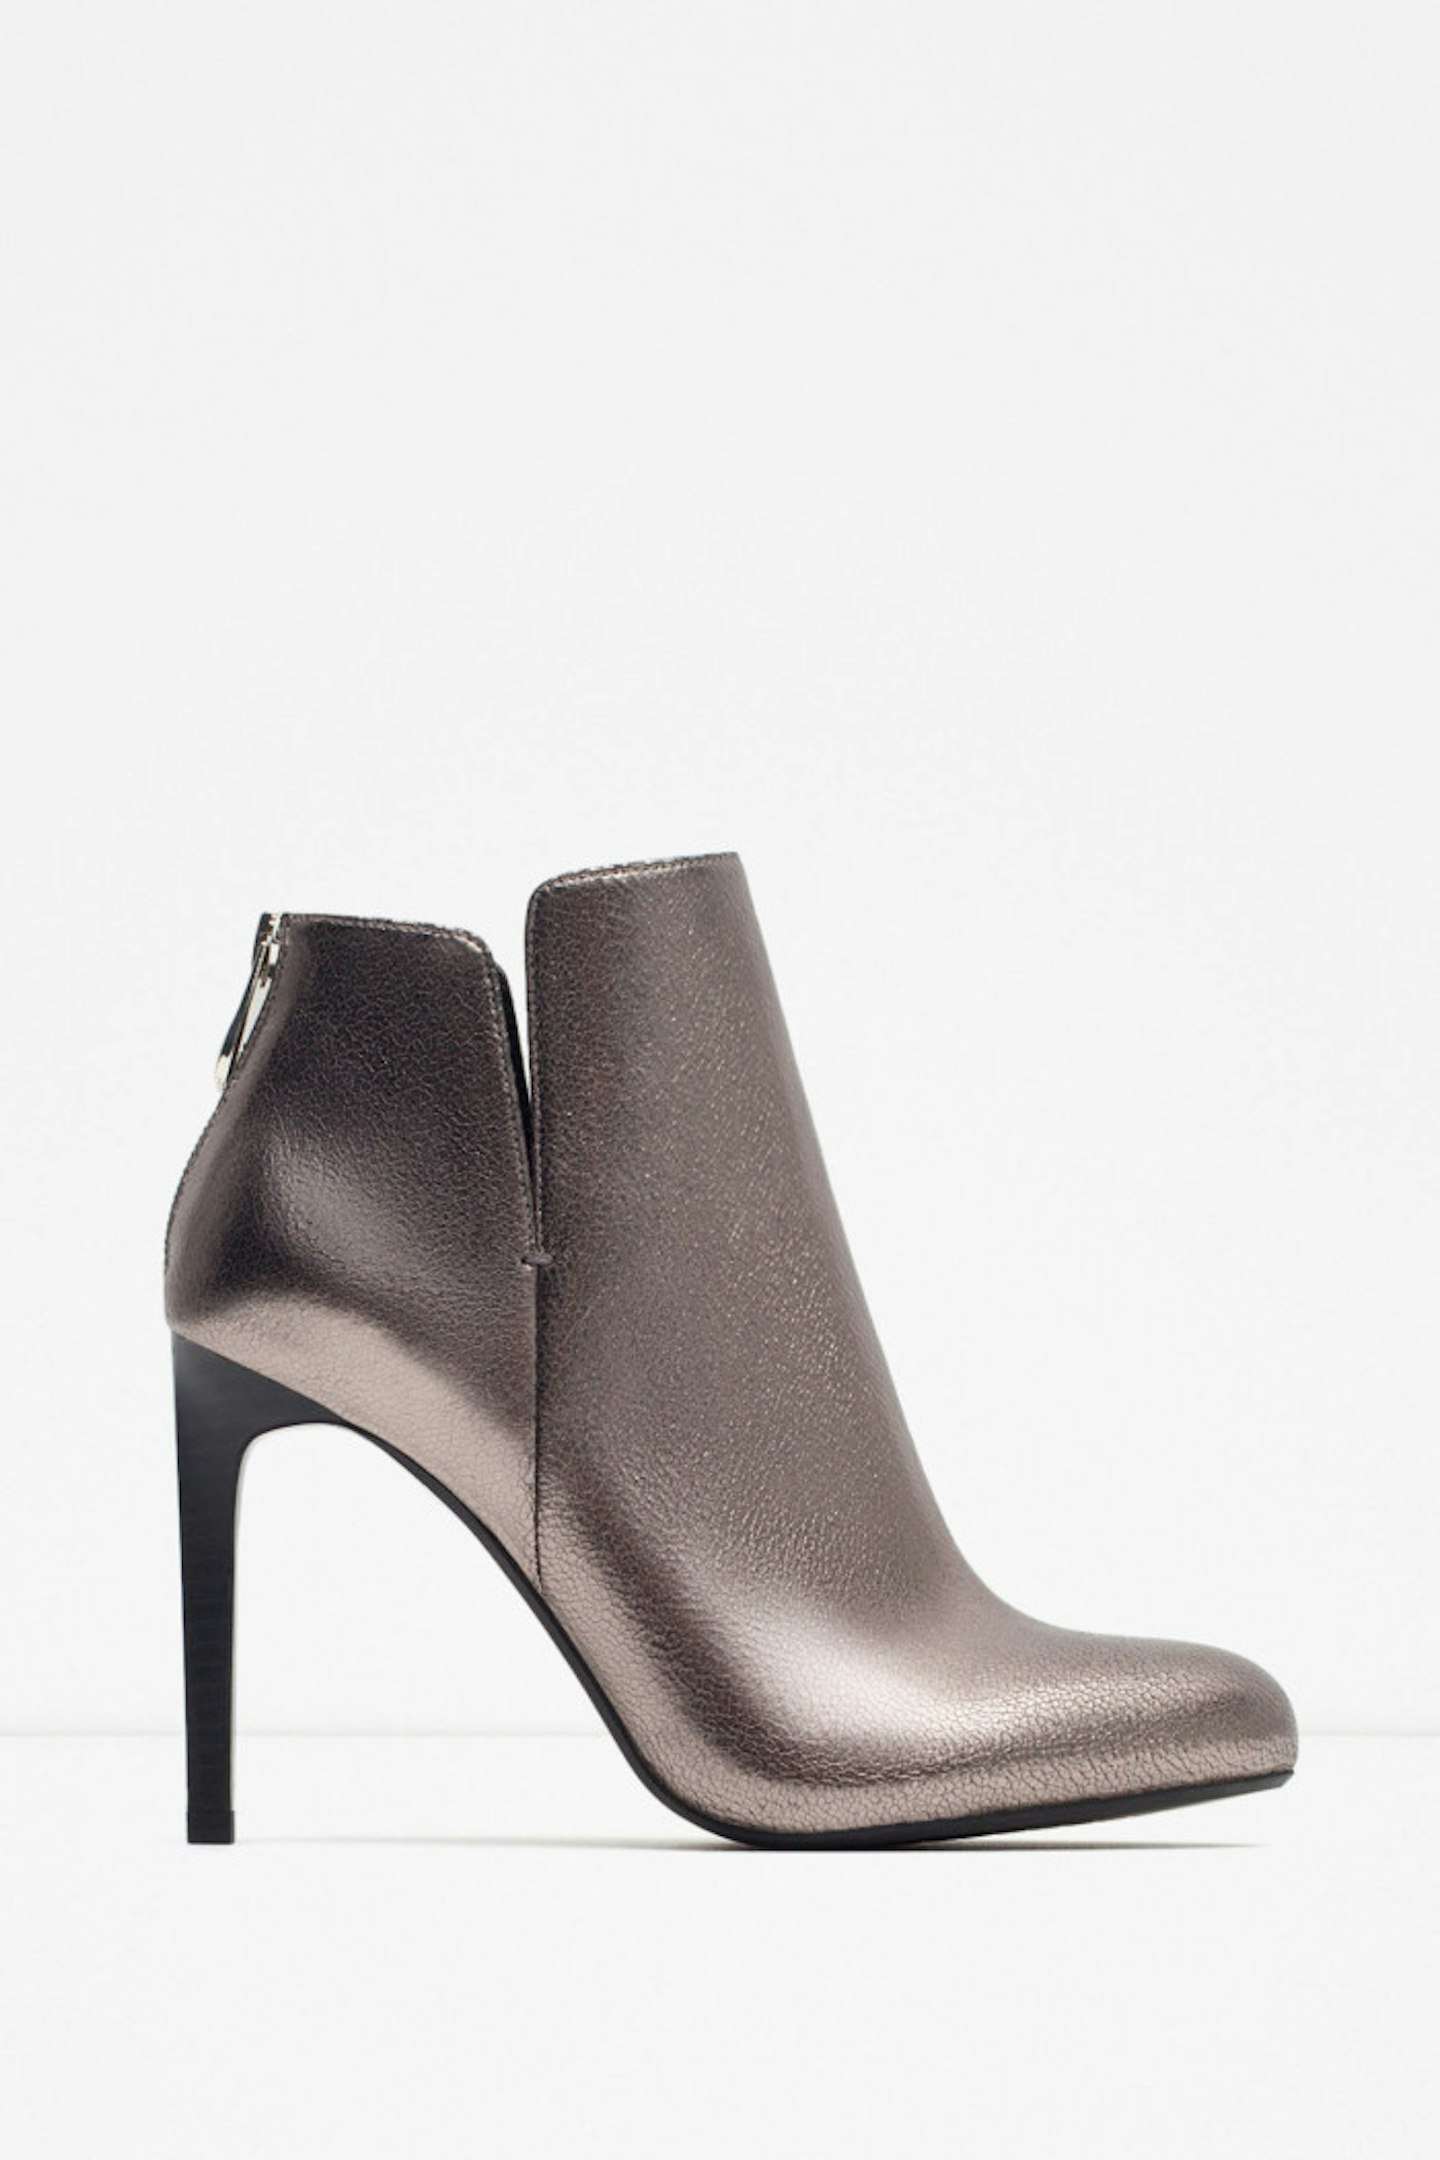 These Zara ankle boots have party written all over them.